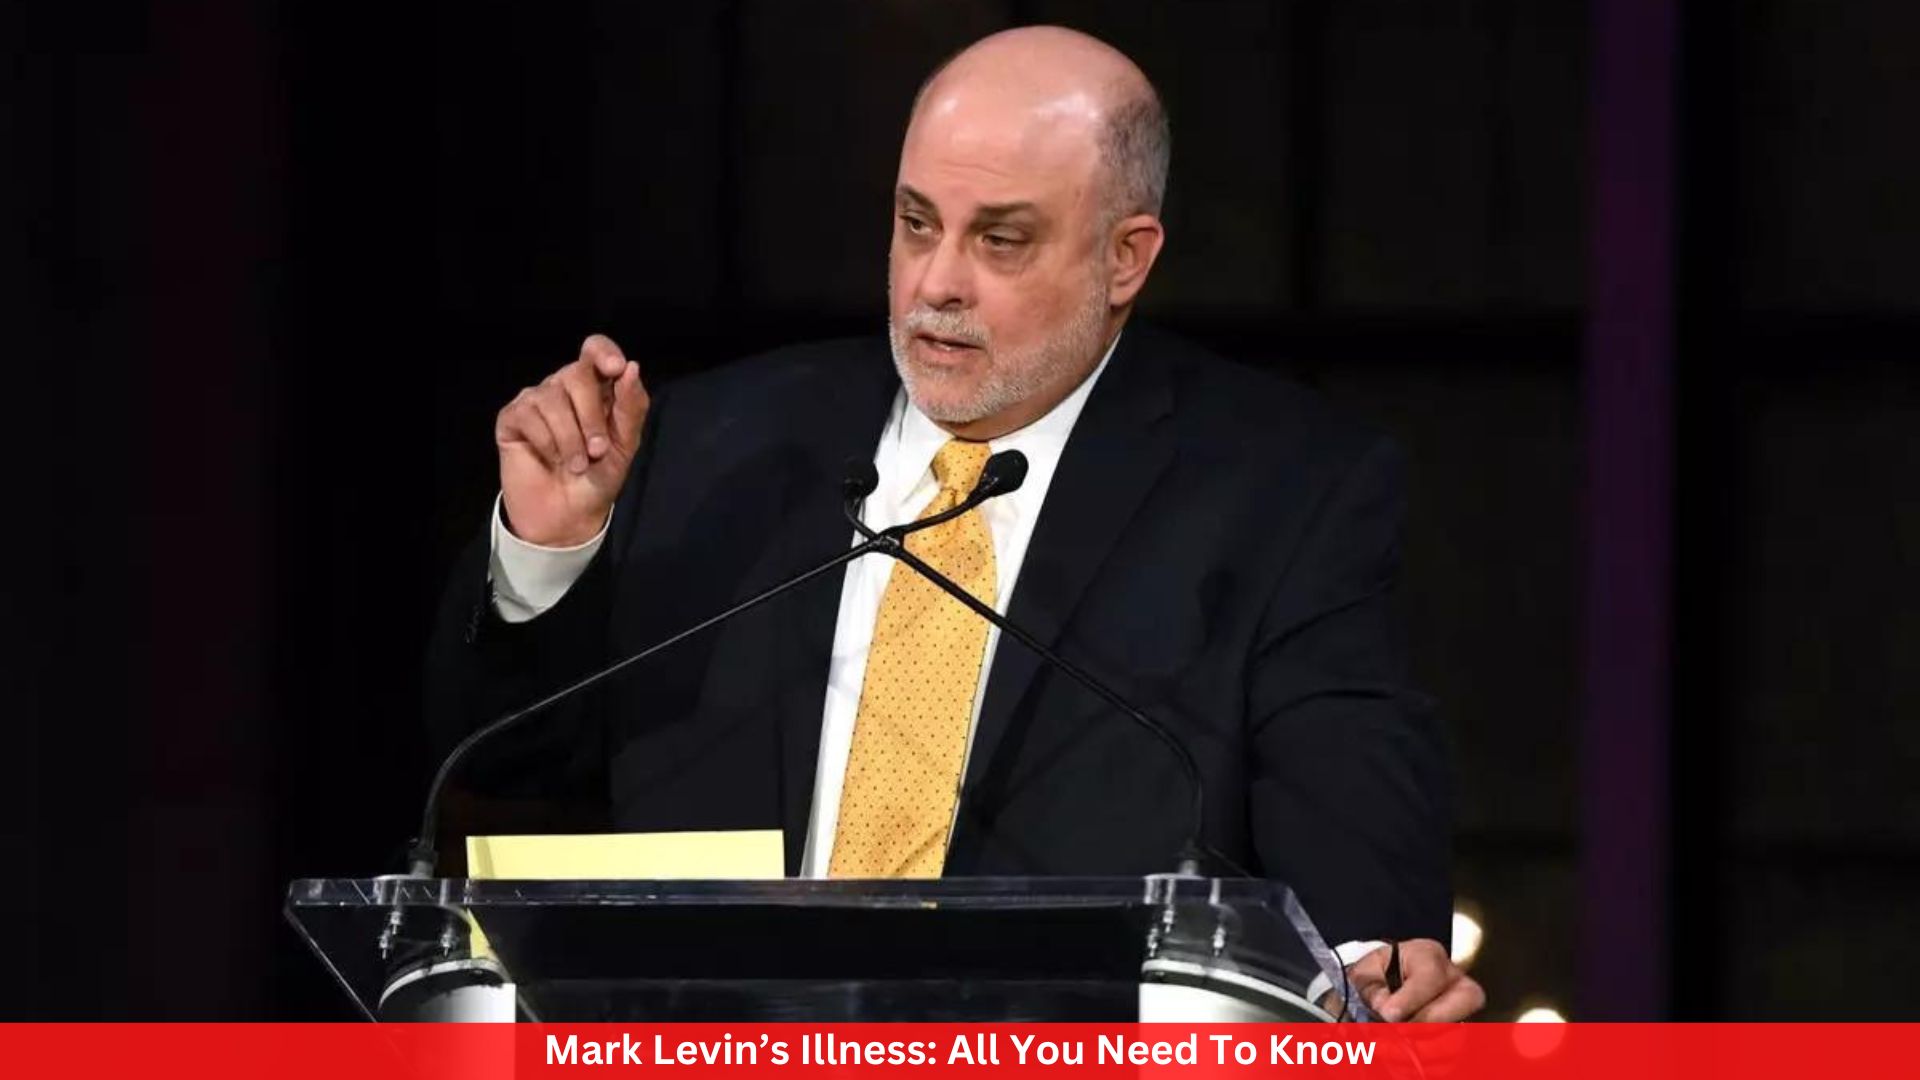 Mark Levin’s Illness: All You Need To Know